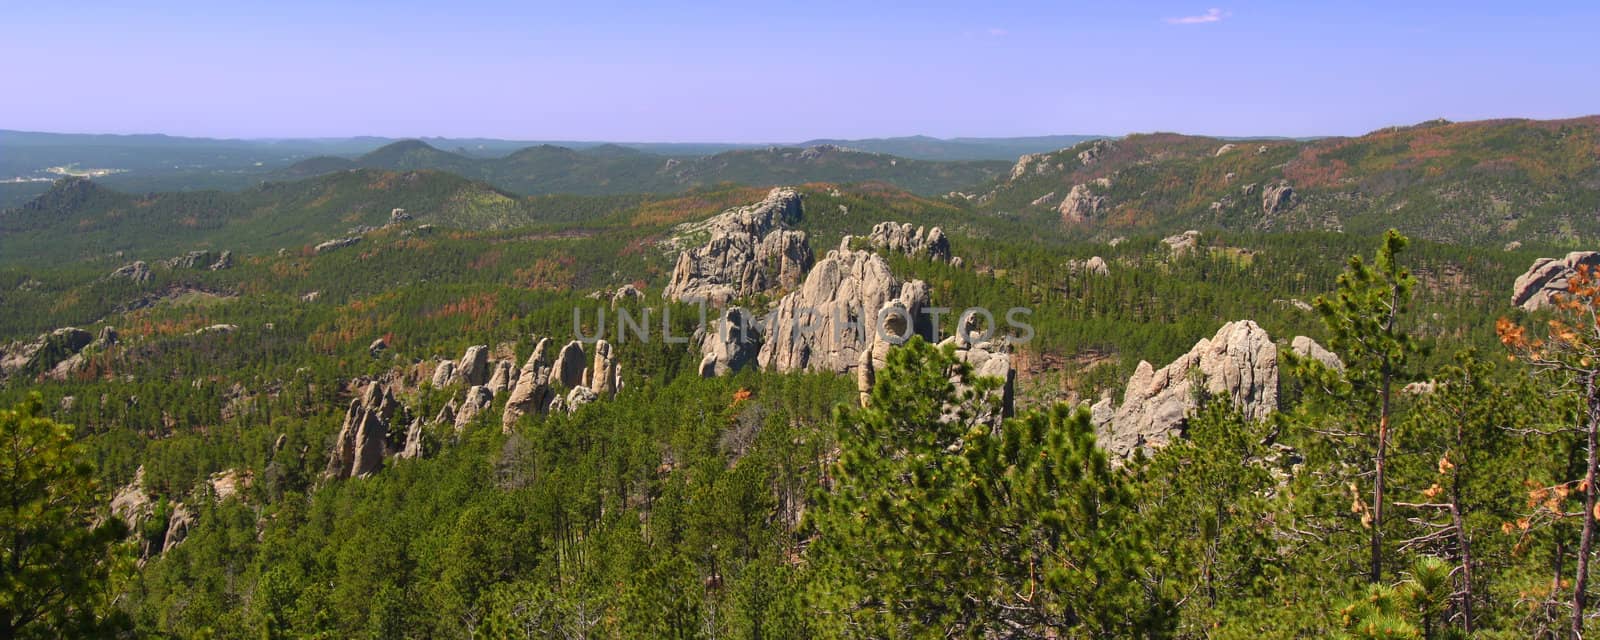 The Needles rock formations of Custer State Park in western South Dakota.